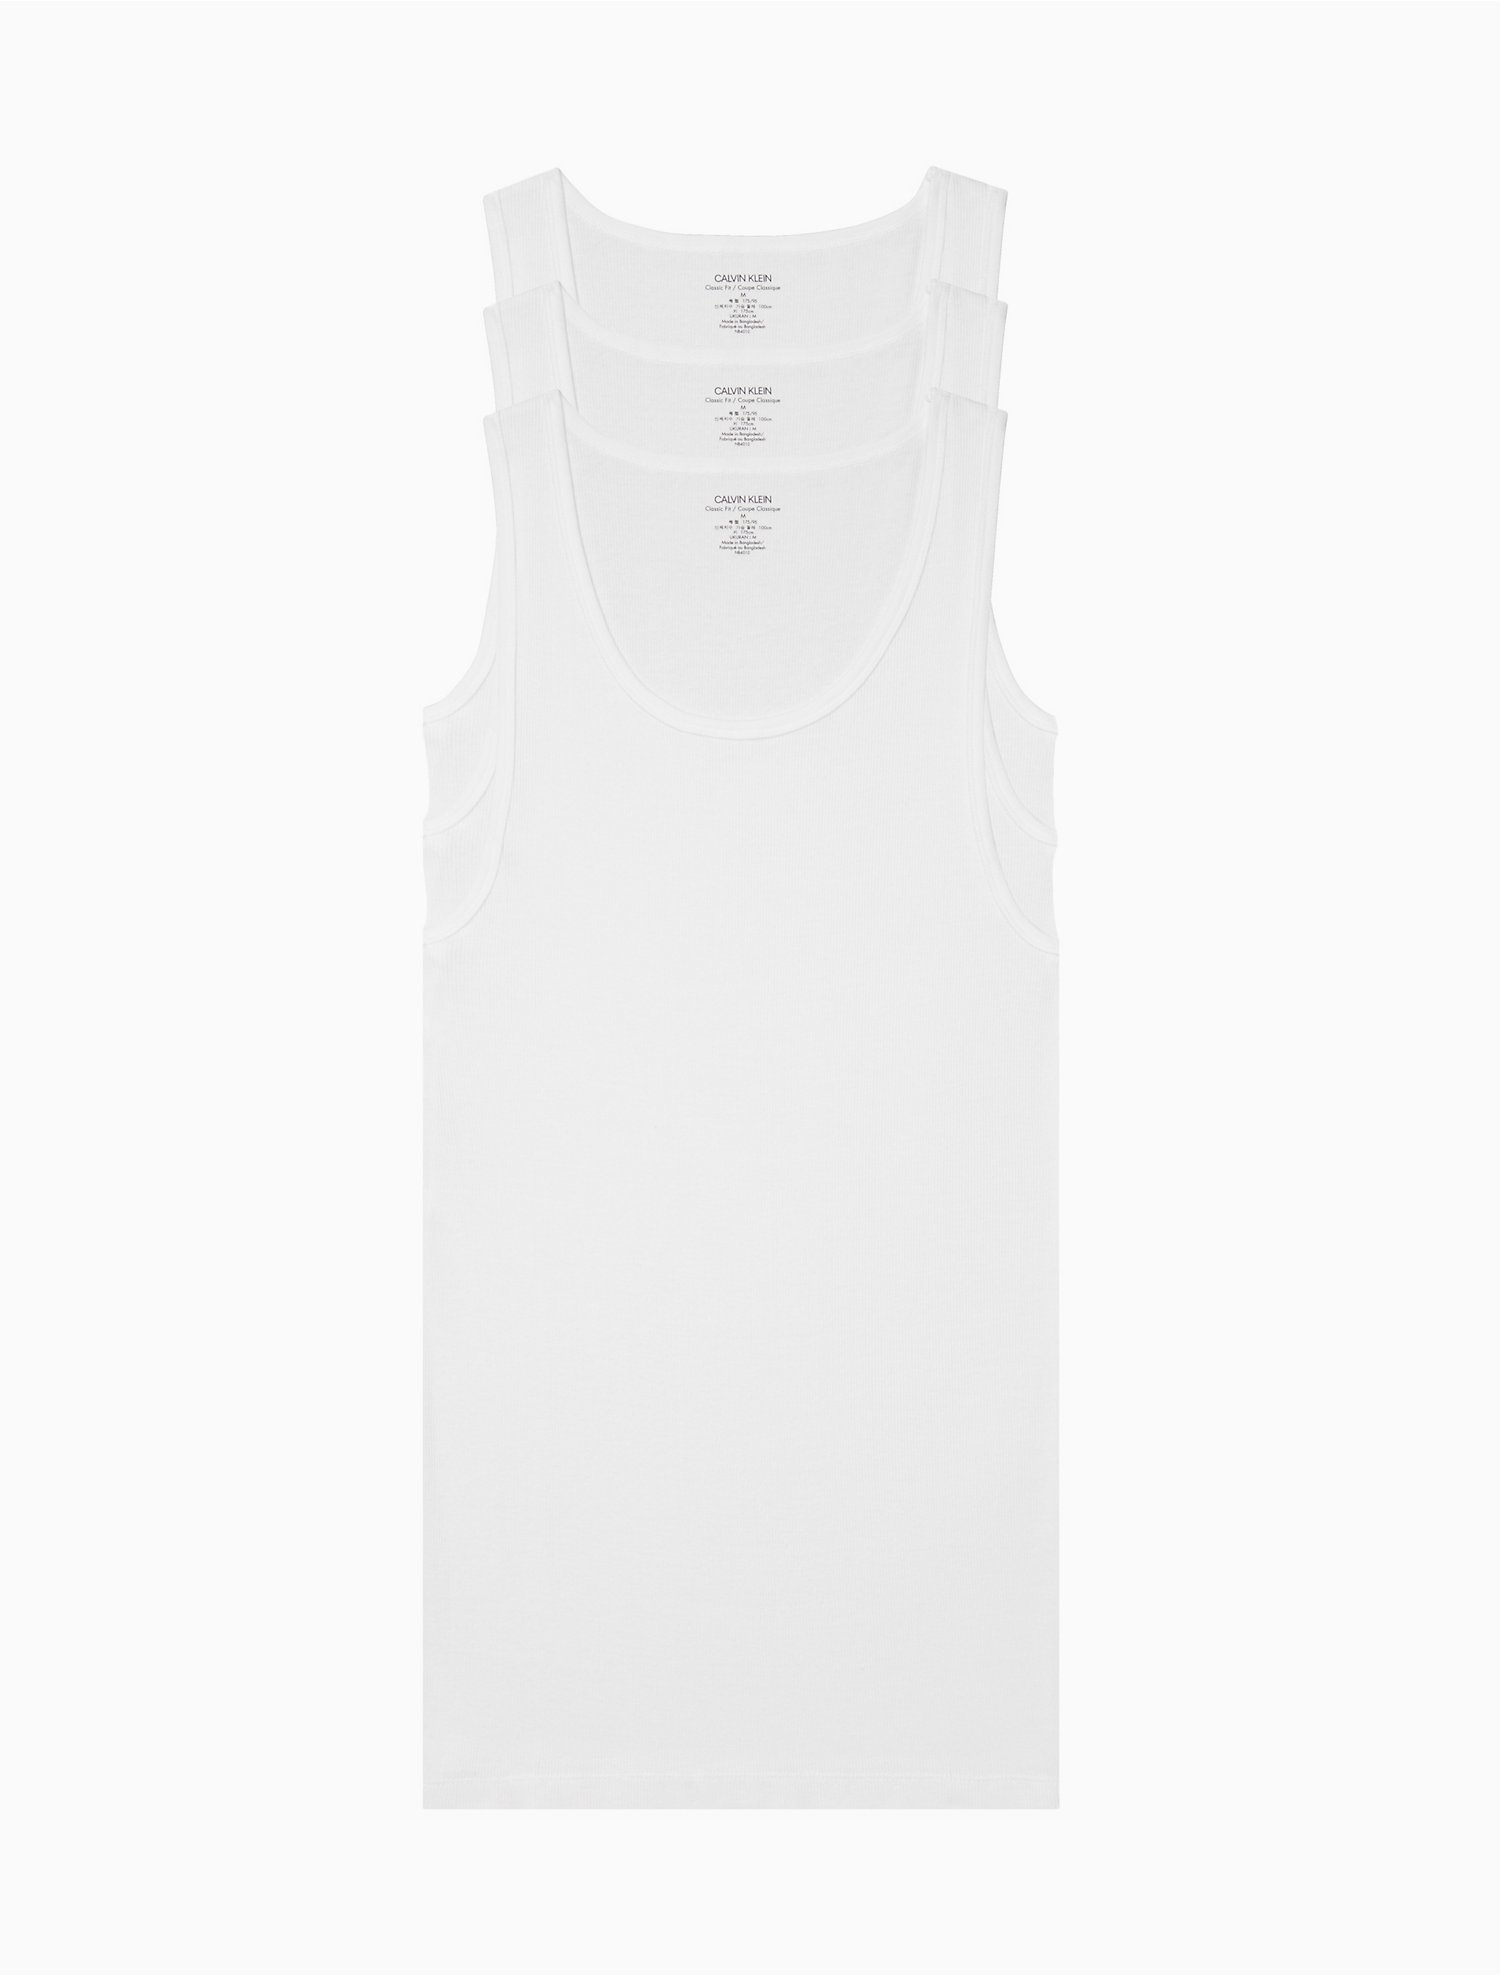 Big & Tall Cotton Classic Fit 3-Pack Tank Top | Calvin Klein® USA